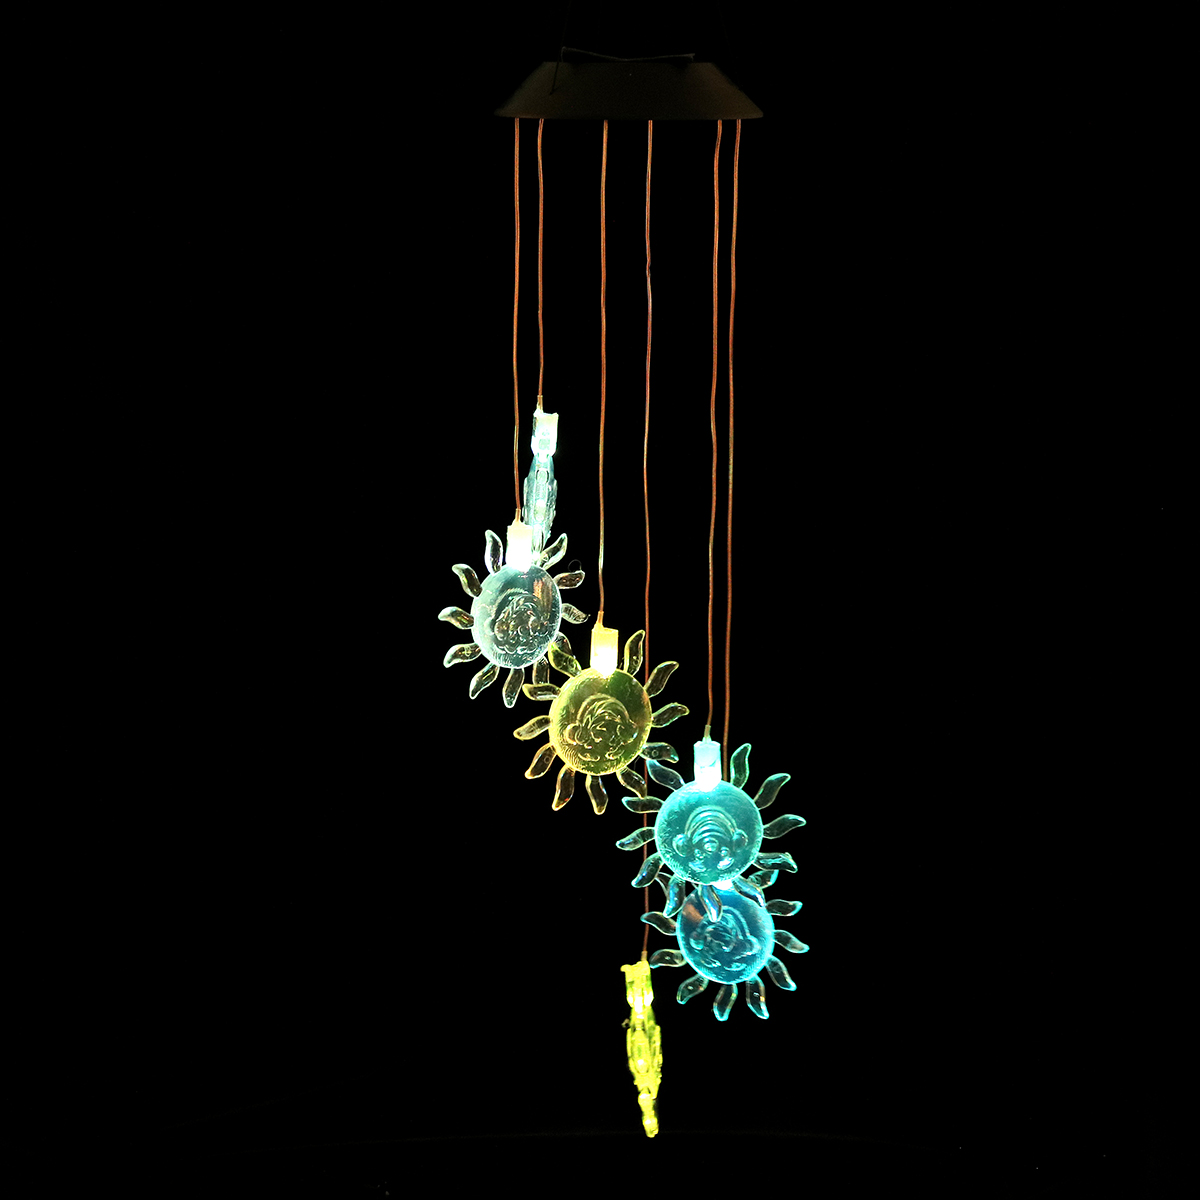 Color-Changing-LED-Solar-Powered-Wind-Chime-Light-Hanging-Garden-Yard-Decor-1760795-11